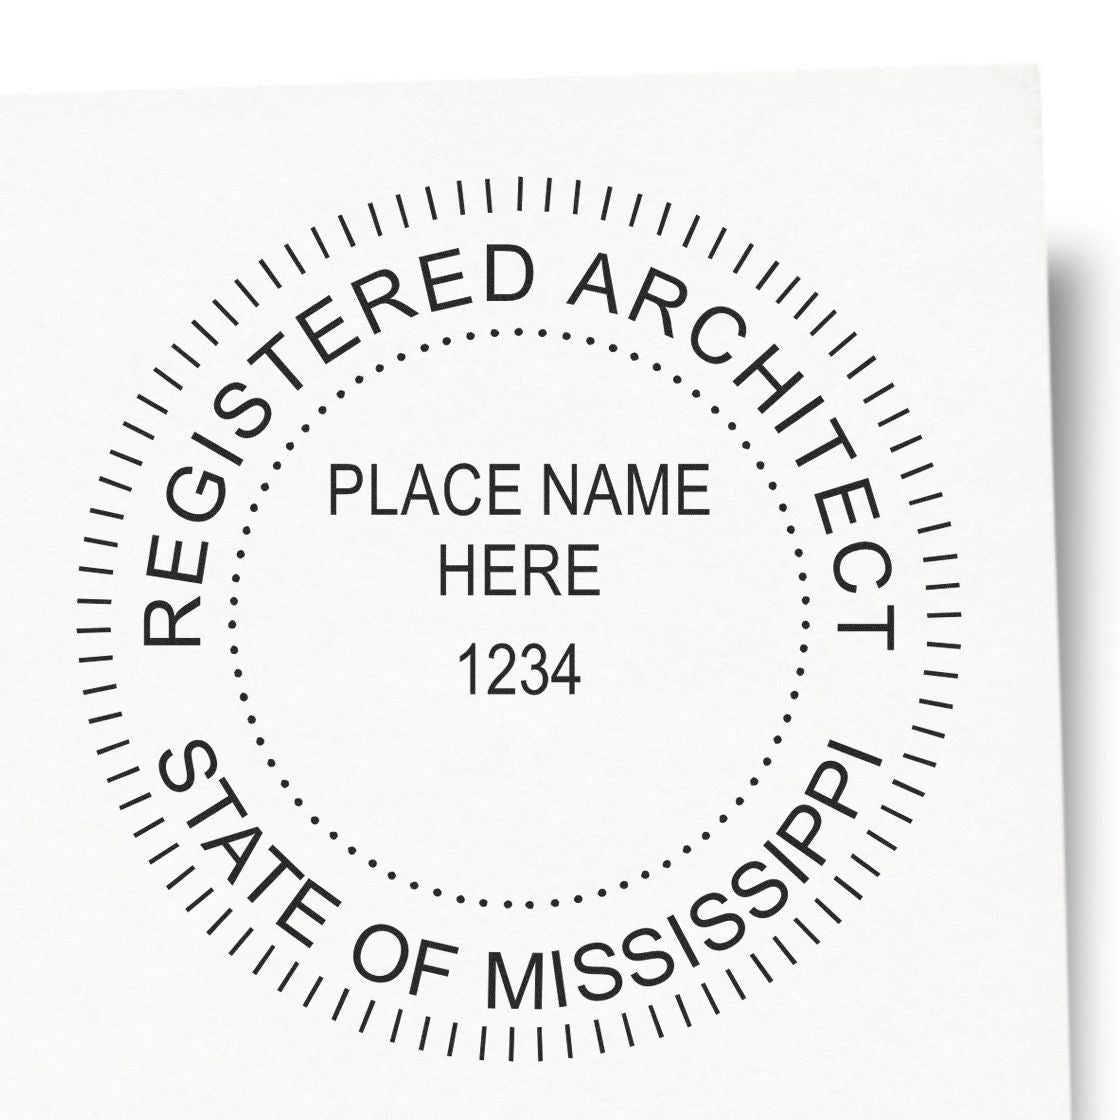 Designs That Leave a Mark: The Importance of Mississippi Architect Stamps Feature Image